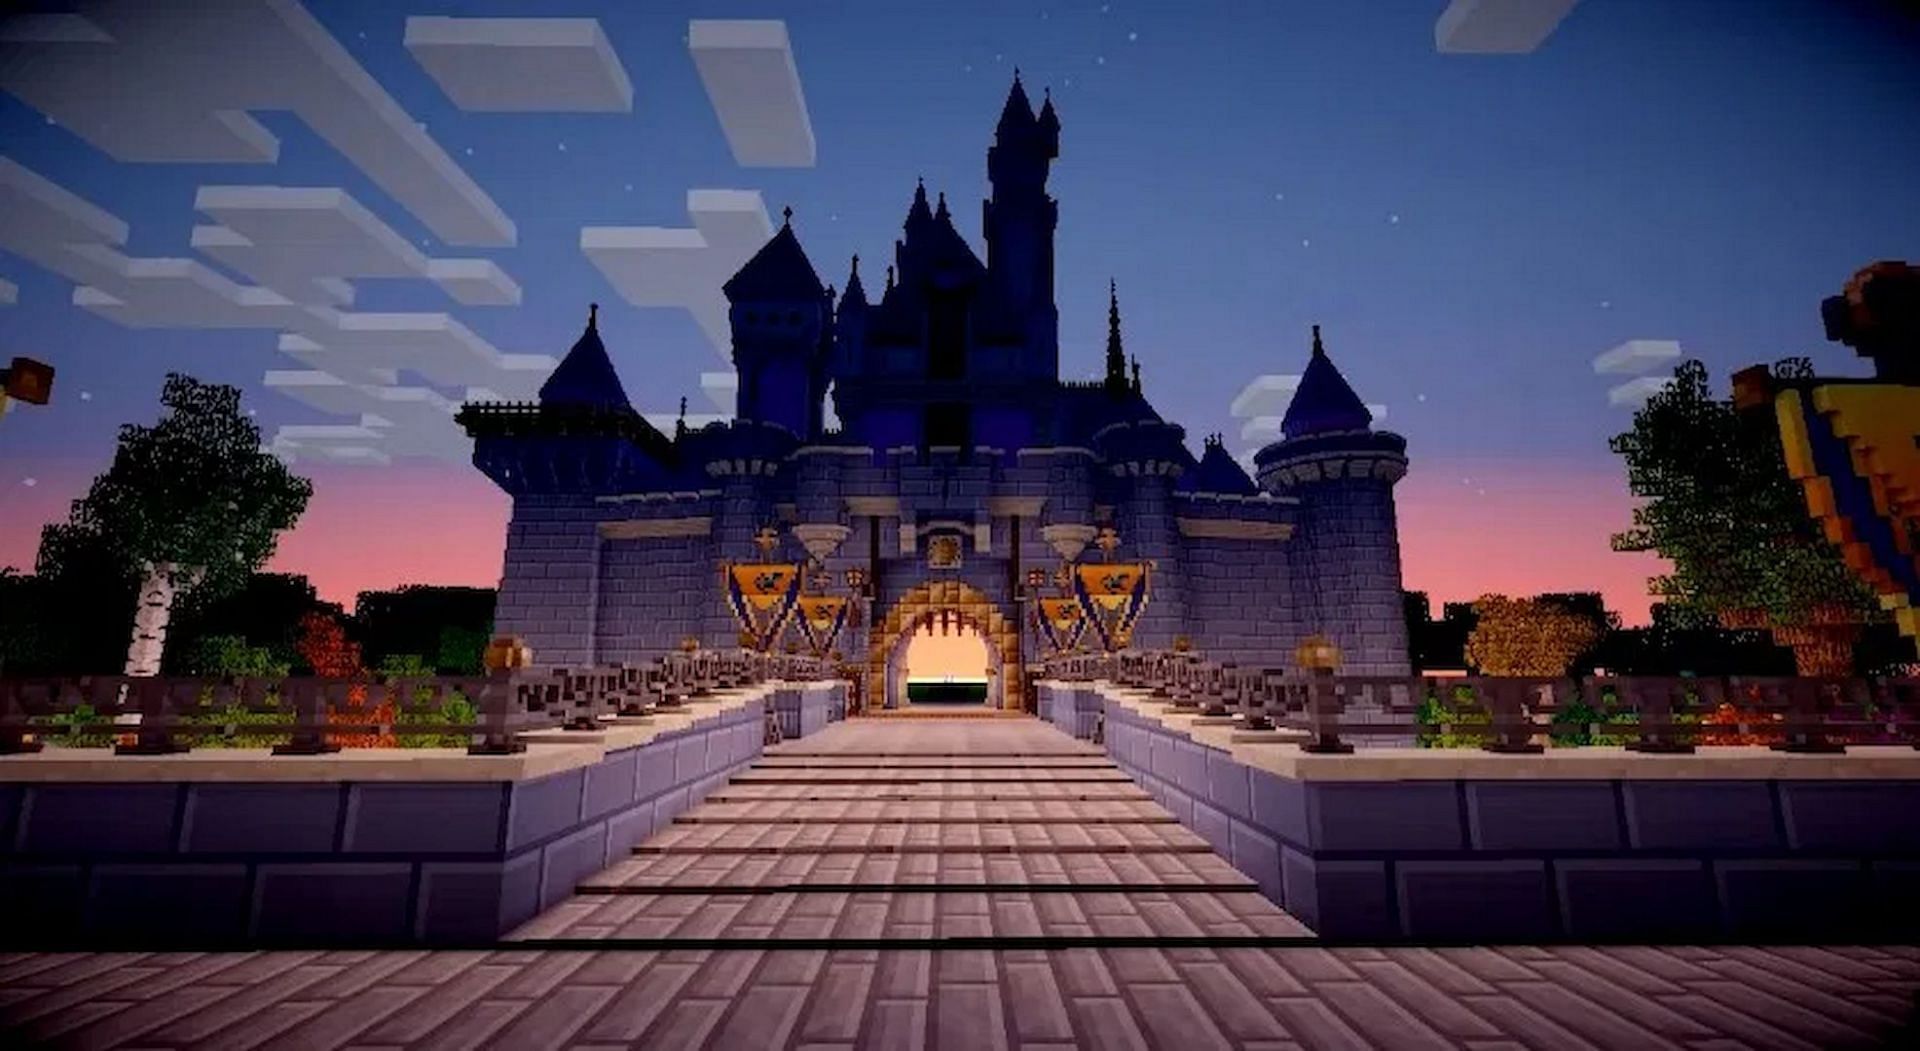 This Disney-inspired castle can make players feel like they are actually at a Disney Theme Park (Image via Sjin, YouTube)